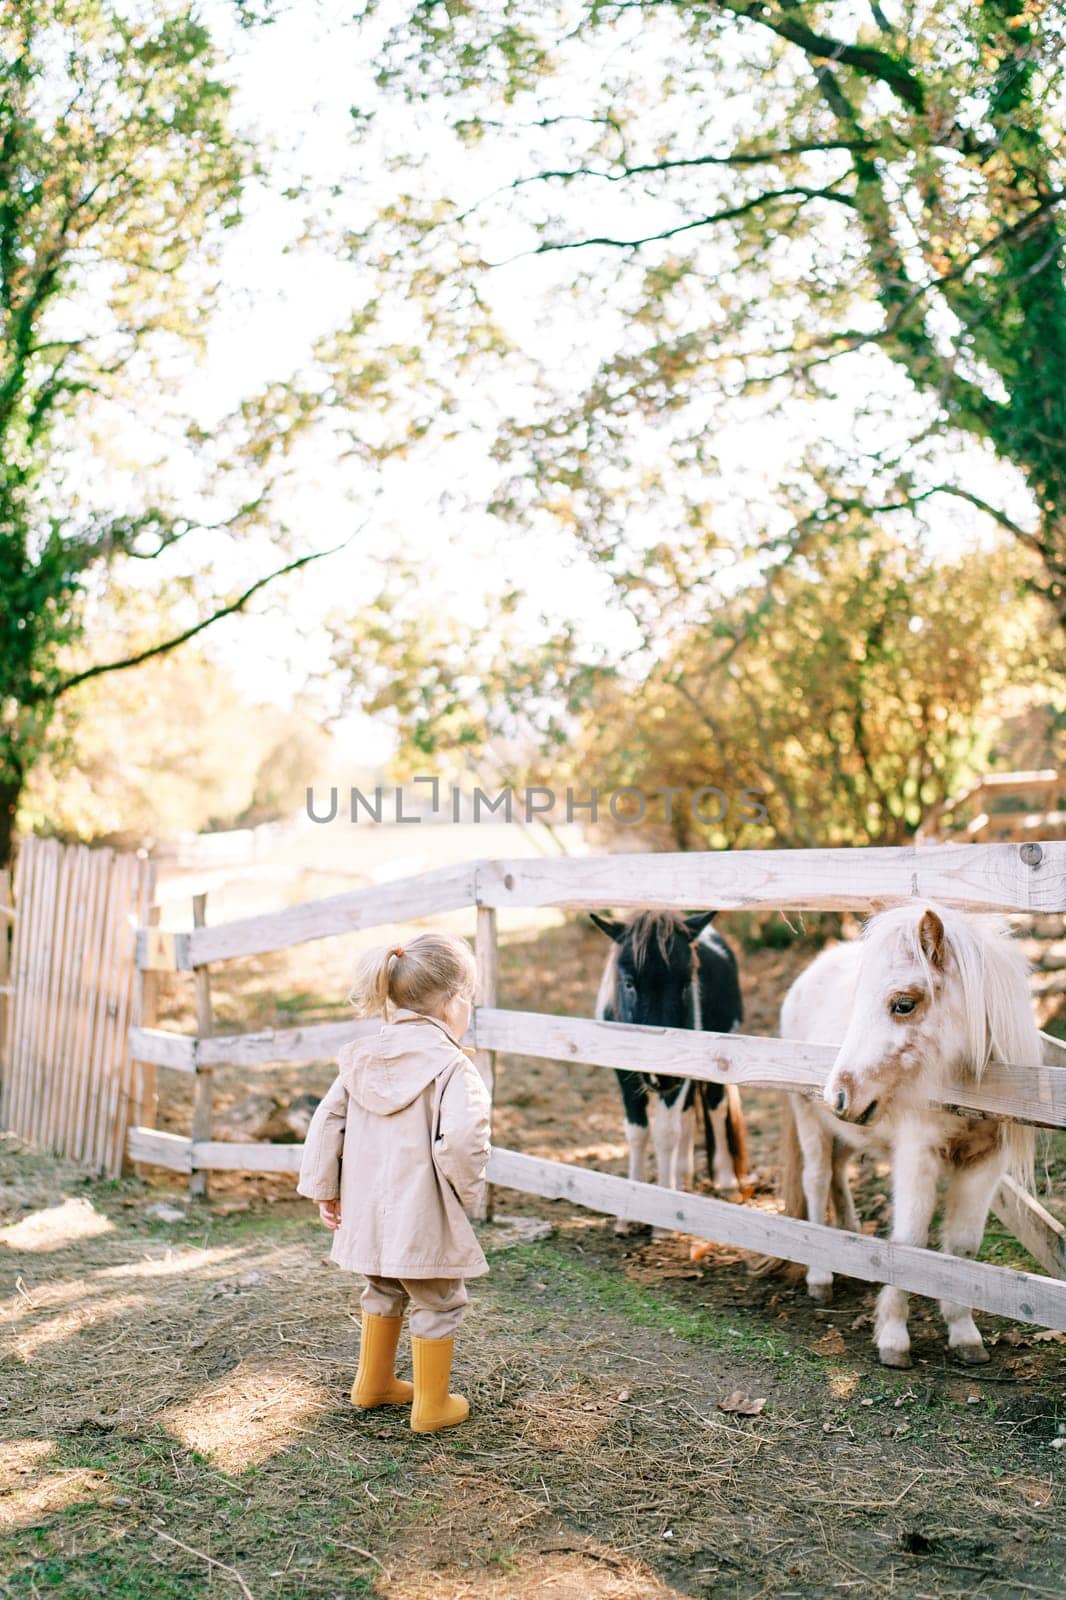 Little girl looks at ponies behind a fence in a paddock on a ranch. Back view by Nadtochiy